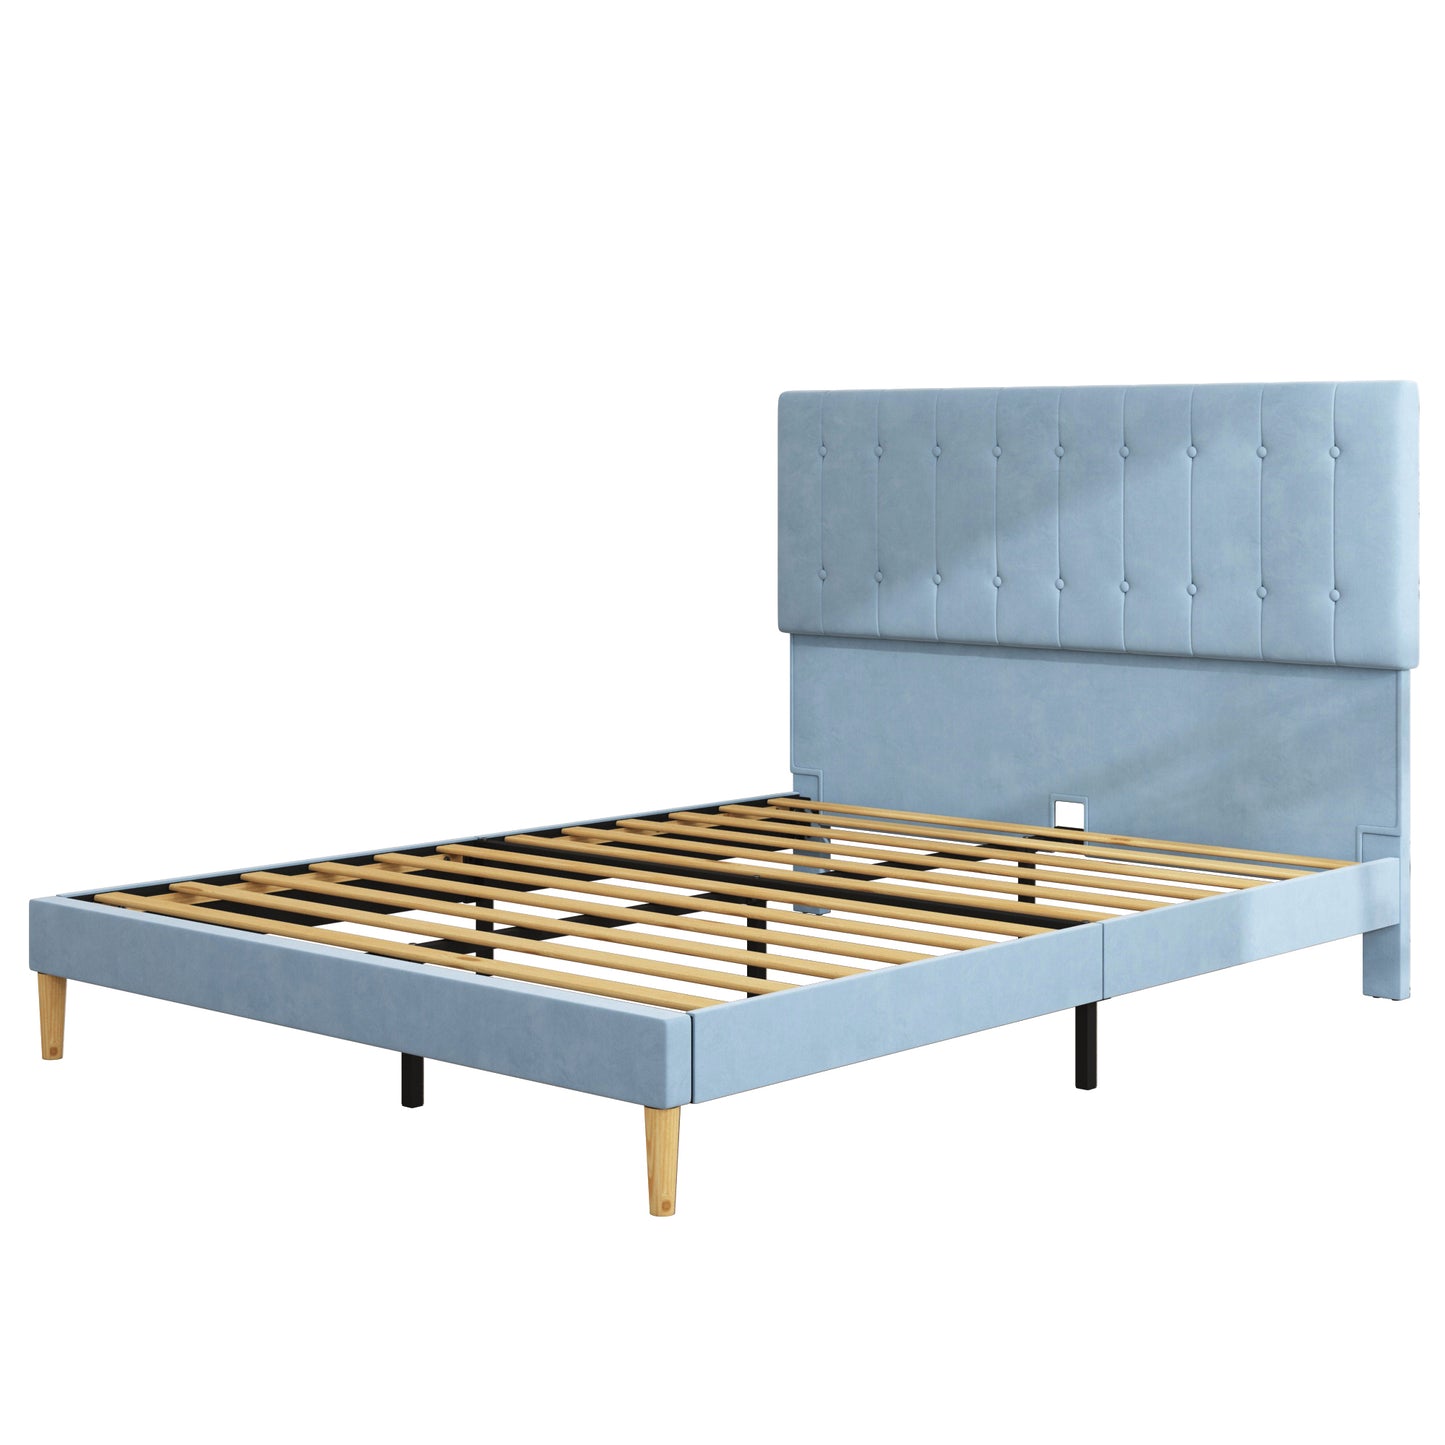 SYNGAR Upholstered Platform Bed Frame Queen Size with Button Tufted Headboard, New Upgrade Queen Bed Frame Mattress Foundation with Strong Slat Support, No Box Spring Needed, Blue